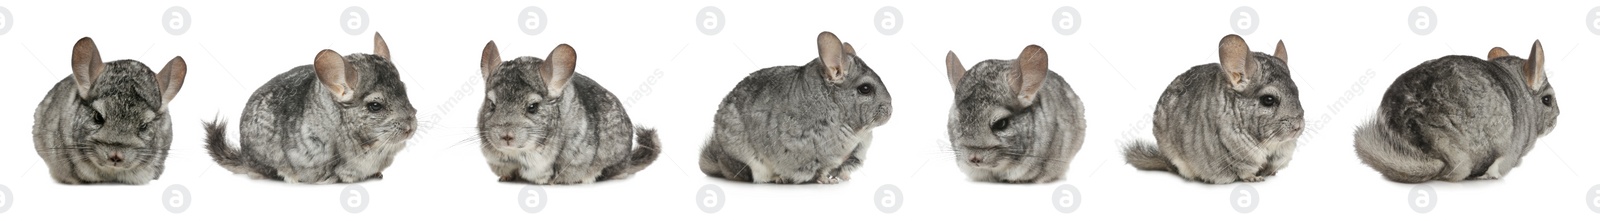 Image of Collage with cute grey chinchillas on white background. Banner design 